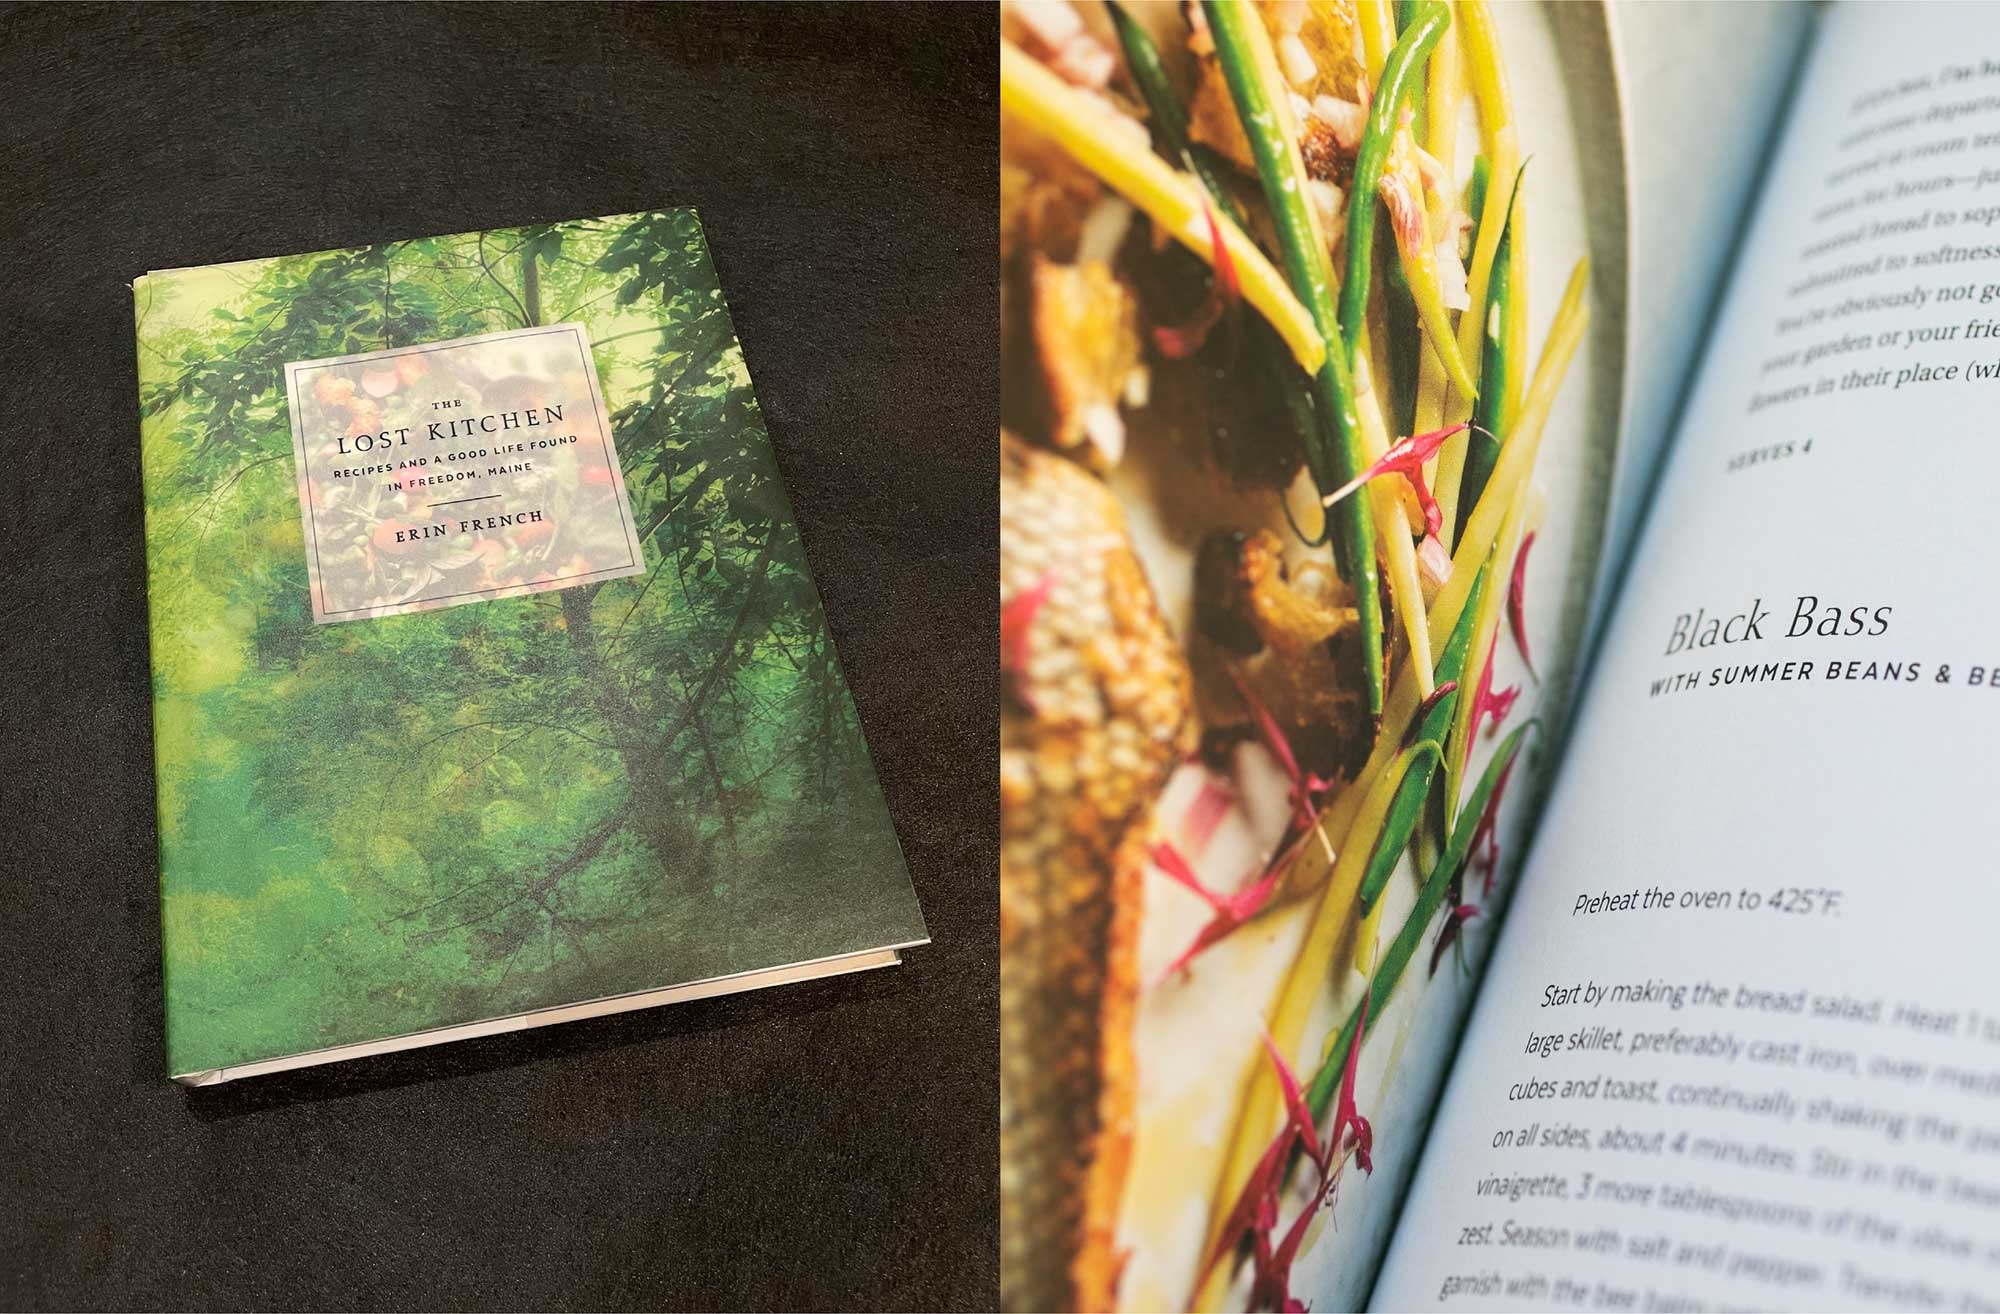 The Lost Kitchen cookbook cover shot with inset side by side